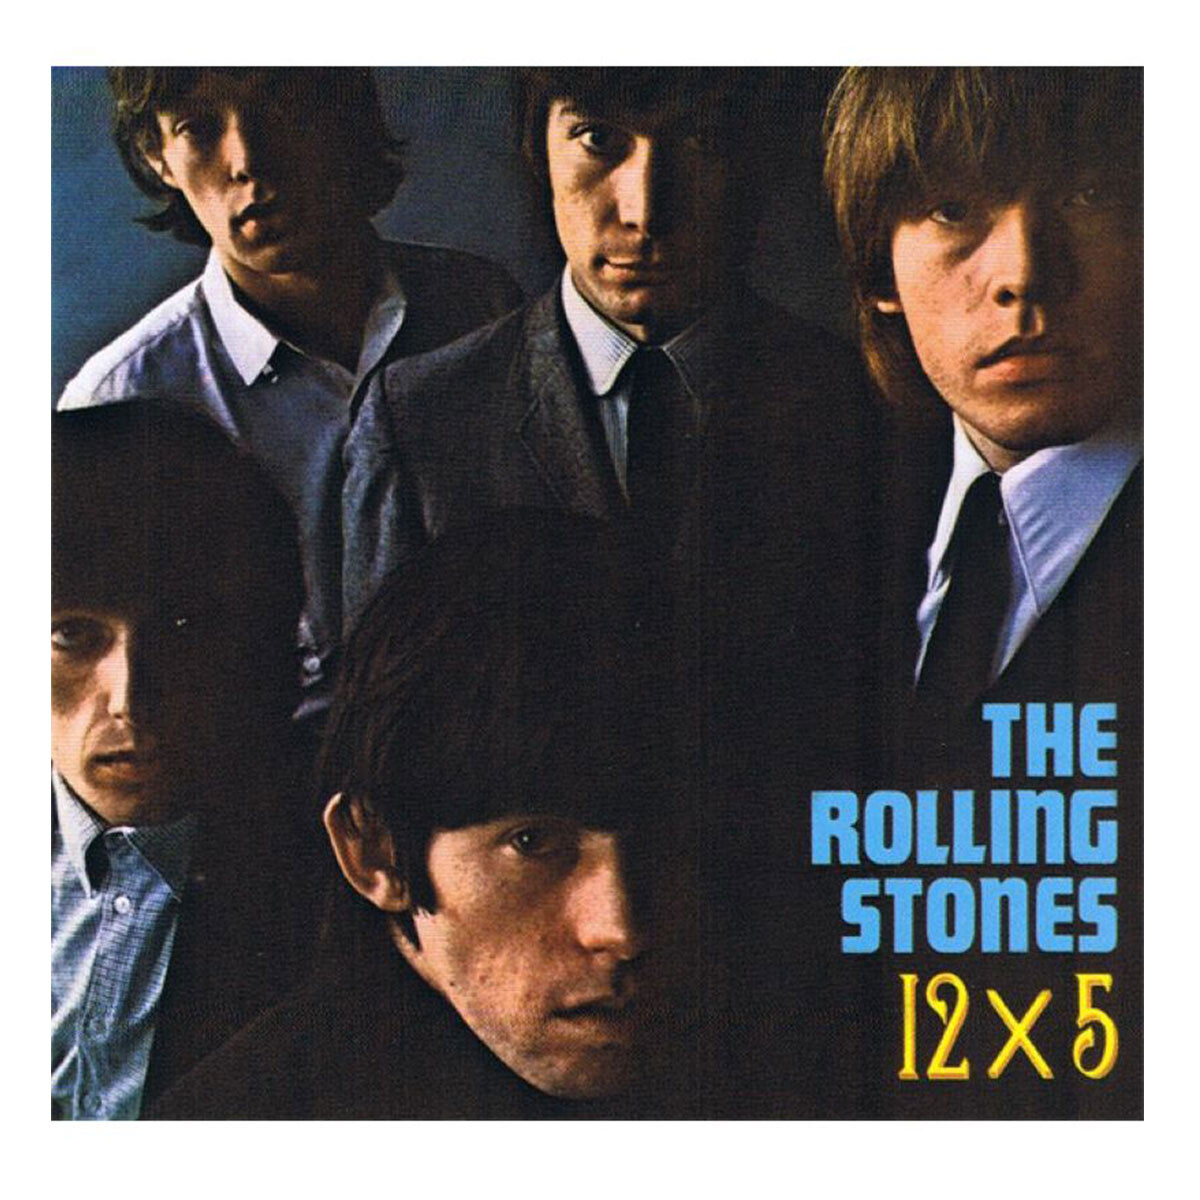 Rolling Stones The - 12 X 5 - Cd 